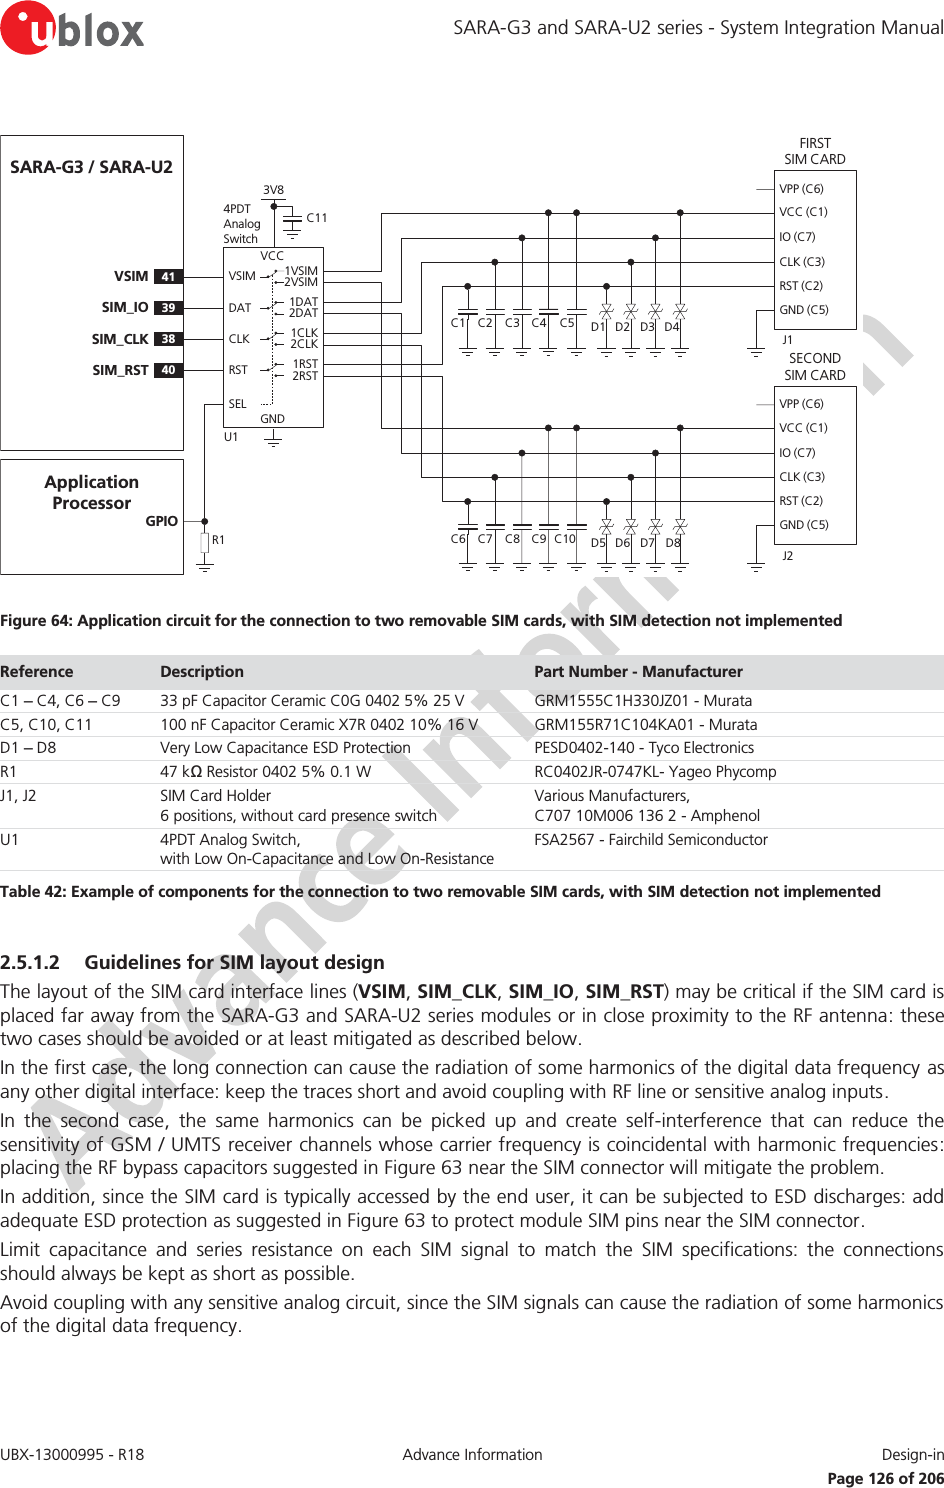 SARA-G3 and SARA-U2 series - System Integration Manual UBX-13000995 - R18  Advance Information  Design-in   Page 126 of 206    Figure 64: Application circuit for the connection to two removable SIM cards, with SIM detection not implemented Reference  Description  Part Number - Manufacturer C1 – C4, C6 – C9 33 pF Capacitor Ceramic C0G 0402 5% 25 V GRM1555C1H330JZ01 - Murata C5, C10, C11 100 nF Capacitor Ceramic X7R 0402 10% 16 V GRM155R71C104KA01 - Murata D1 – D8 Very Low Capacitance ESD Protection PESD0402-140 - Tyco Electronics  R1 47 kΩ Resistor 0402 5% 0.1 W RC0402JR-0747KL- Yageo Phycomp J1, J2 SIM Card Holder 6 positions, without card presence switch Various Manufacturers, C707 10M006 136 2 - Amphenol U1 4PDT Analog Switch,  with Low On-Capacitance and Low On-Resistance FSA2567 - Fairchild Semiconductor Table 42: Example of components for the connection to two removable SIM cards, with SIM detection not implemented  2.5.1.2 Guidelines for SIM layout design The layout of the SIM card interface lines (VSIM, SIM_CLK, SIM_IO, SIM_RST) may be critical if the SIM card is placed far away from the SARA-G3 and SARA-U2 series modules or in close proximity to the RF antenna: these two cases should be avoided or at least mitigated as described below.  In the first case, the long connection can cause the radiation of some harmonics of the digital data frequency as any other digital interface: keep the traces short and avoid coupling with RF line or sensitive analog inputs. In the second case, the same harmonics can be picked up and create self-interference that can reduce the sensitivity of GSM / UMTS receiver channels whose carrier frequency is coincidental with harmonic frequencies: placing the RF bypass capacitors suggested in Figure 63 near the SIM connector will mitigate the problem. In addition, since the SIM card is typically accessed by the end user, it can be subjected to ESD discharges: add adequate ESD protection as suggested in Figure 63 to protect module SIM pins near the SIM connector. Limit capacitance and series resistance on each SIM signal to match the SIM specifications: the connections should always be kept as short as possible. Avoid coupling with any sensitive analog circuit, since the SIM signals can cause the radiation of some harmonics of the digital data frequency.SARA-G3 / SARA-U2C1FIRST         SIM CARDVPP (C6)VCC (C1)IO (C7)CLK (C3)RST (C2)GND (C5)C2 C3 C5J1C4 D1 D2 D3 D4GNDU141VSIMVSIM 1VSIM2VSIMVCCC114PDT Analog Switch3V839SIM_IODAT 1DAT2DAT38SIM_CLKCLK 1CLK2CLK40SIM_RSTRST 1RST2RSTSELSECOND   SIM CARDVPP (C6)VCC (C1)IO (C7)CLK (C3)RST (C2)GND (C5)J2C6 C7 C8 C10C9 D5 D6 D7 D8Application ProcessorGPIOR1